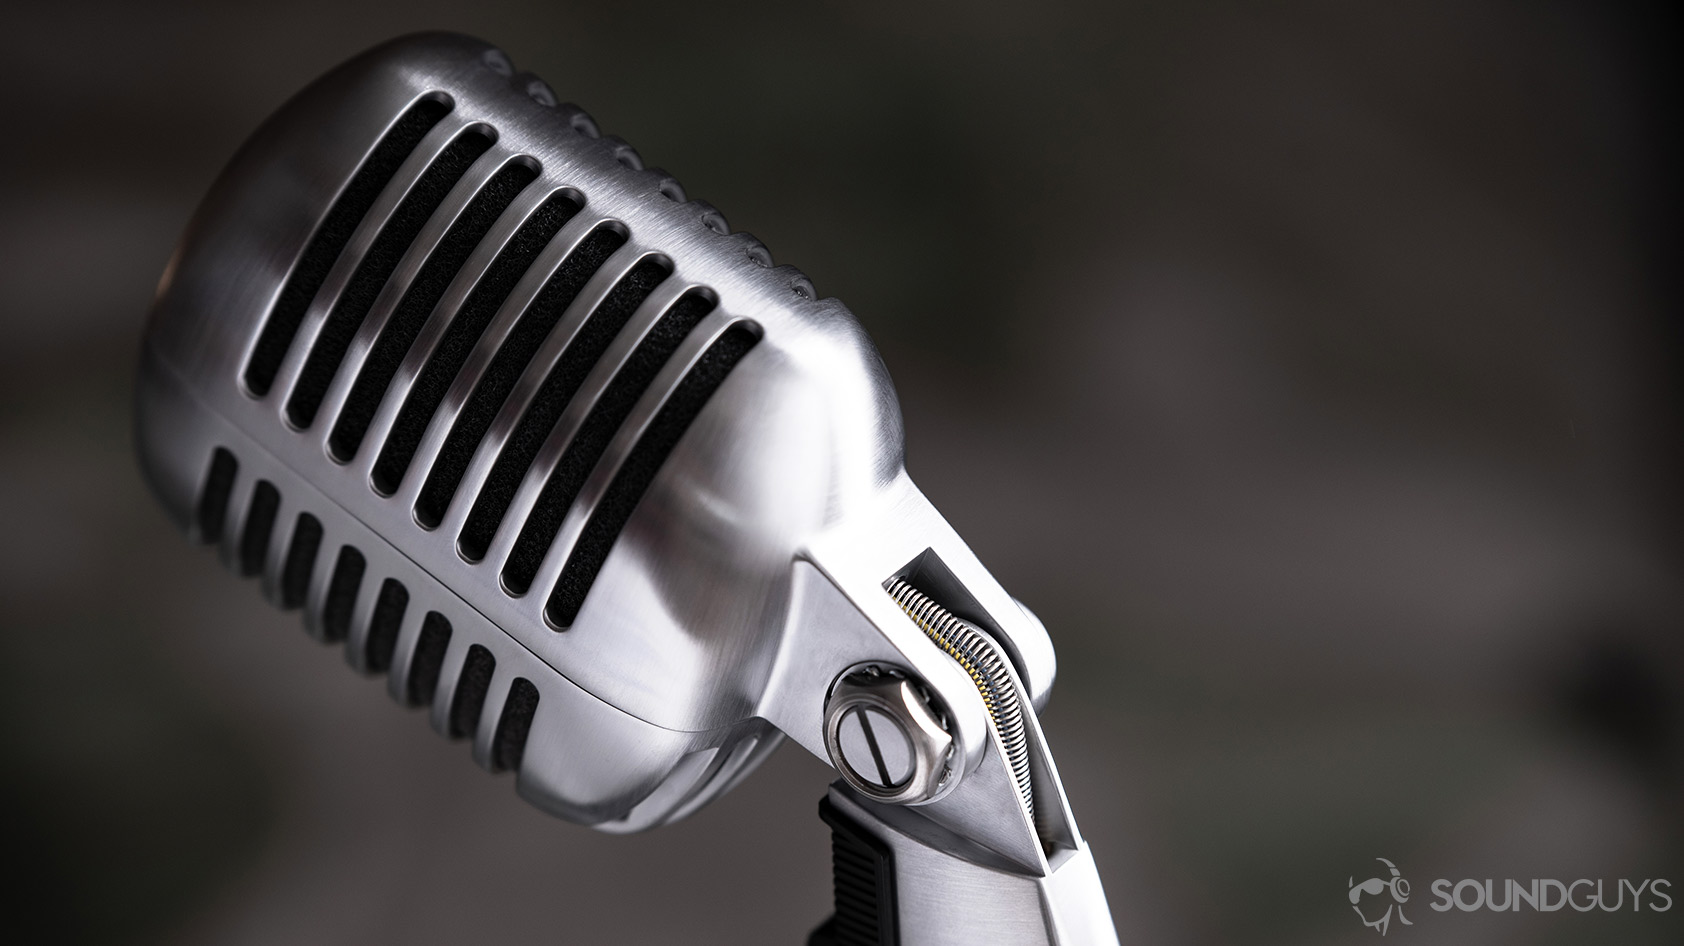 The Shure 55SH being bent toward the front of the mic.